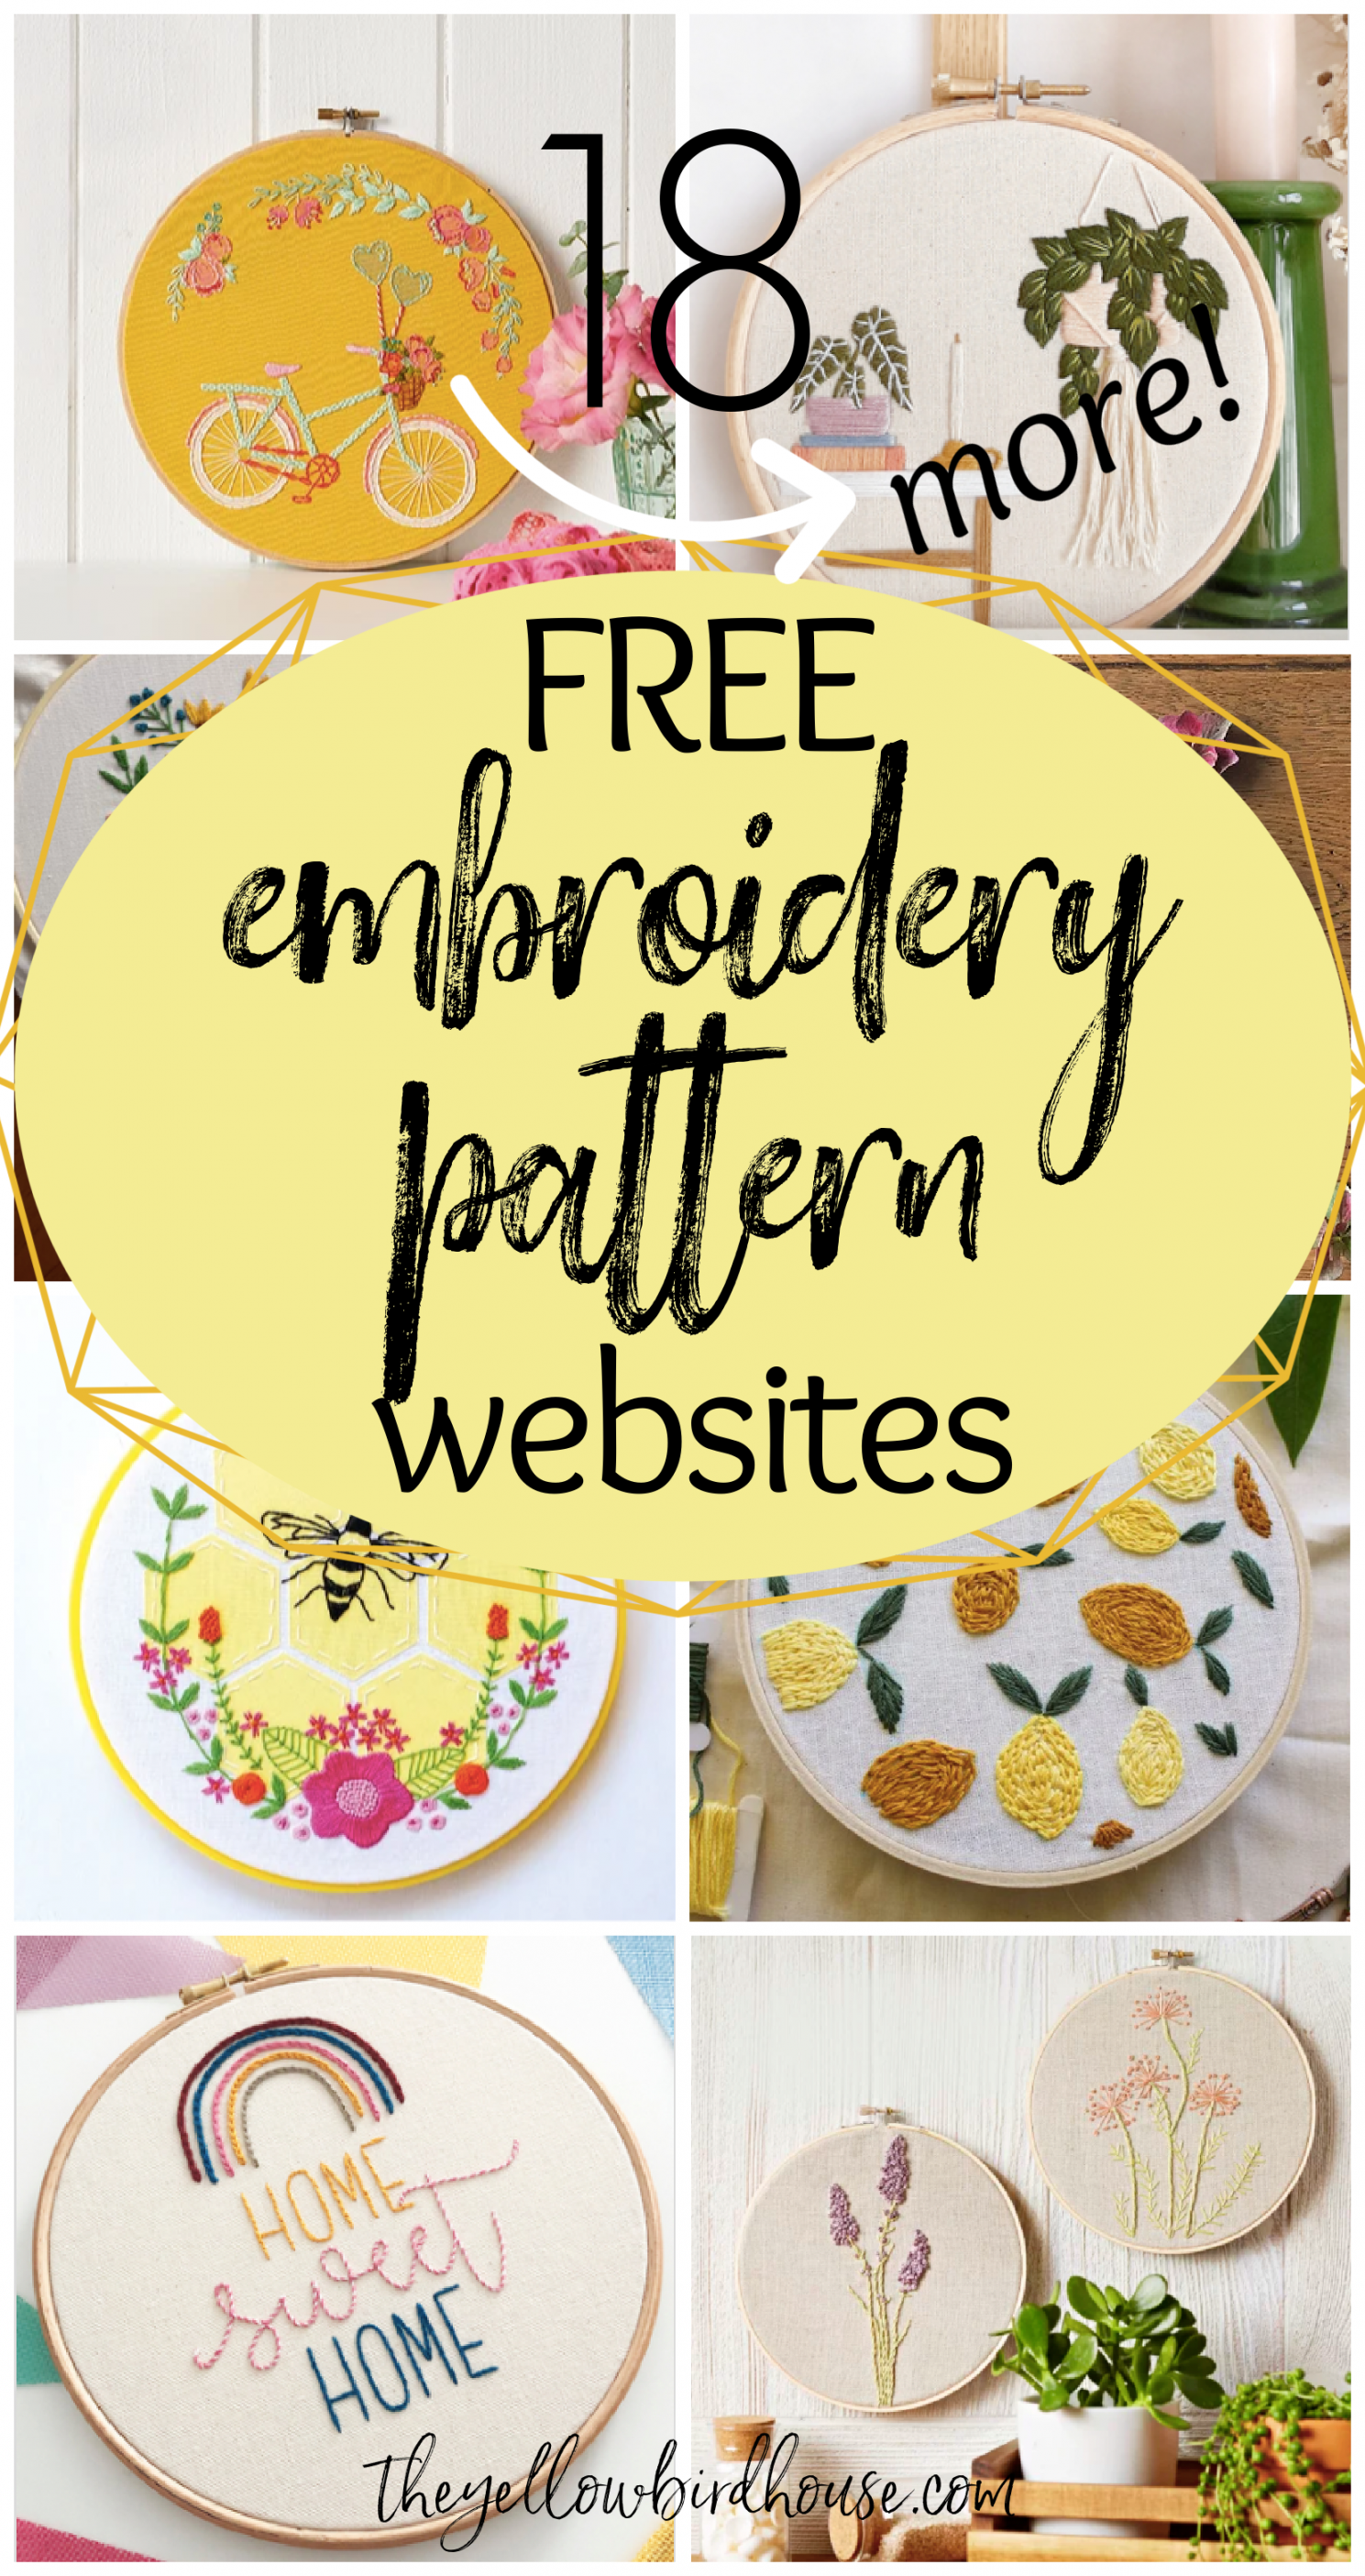 More Websites with Free Embroidery Patterns - The Yellow Birdhouse - FREE Printables - Free Printable Embroidery Patterns